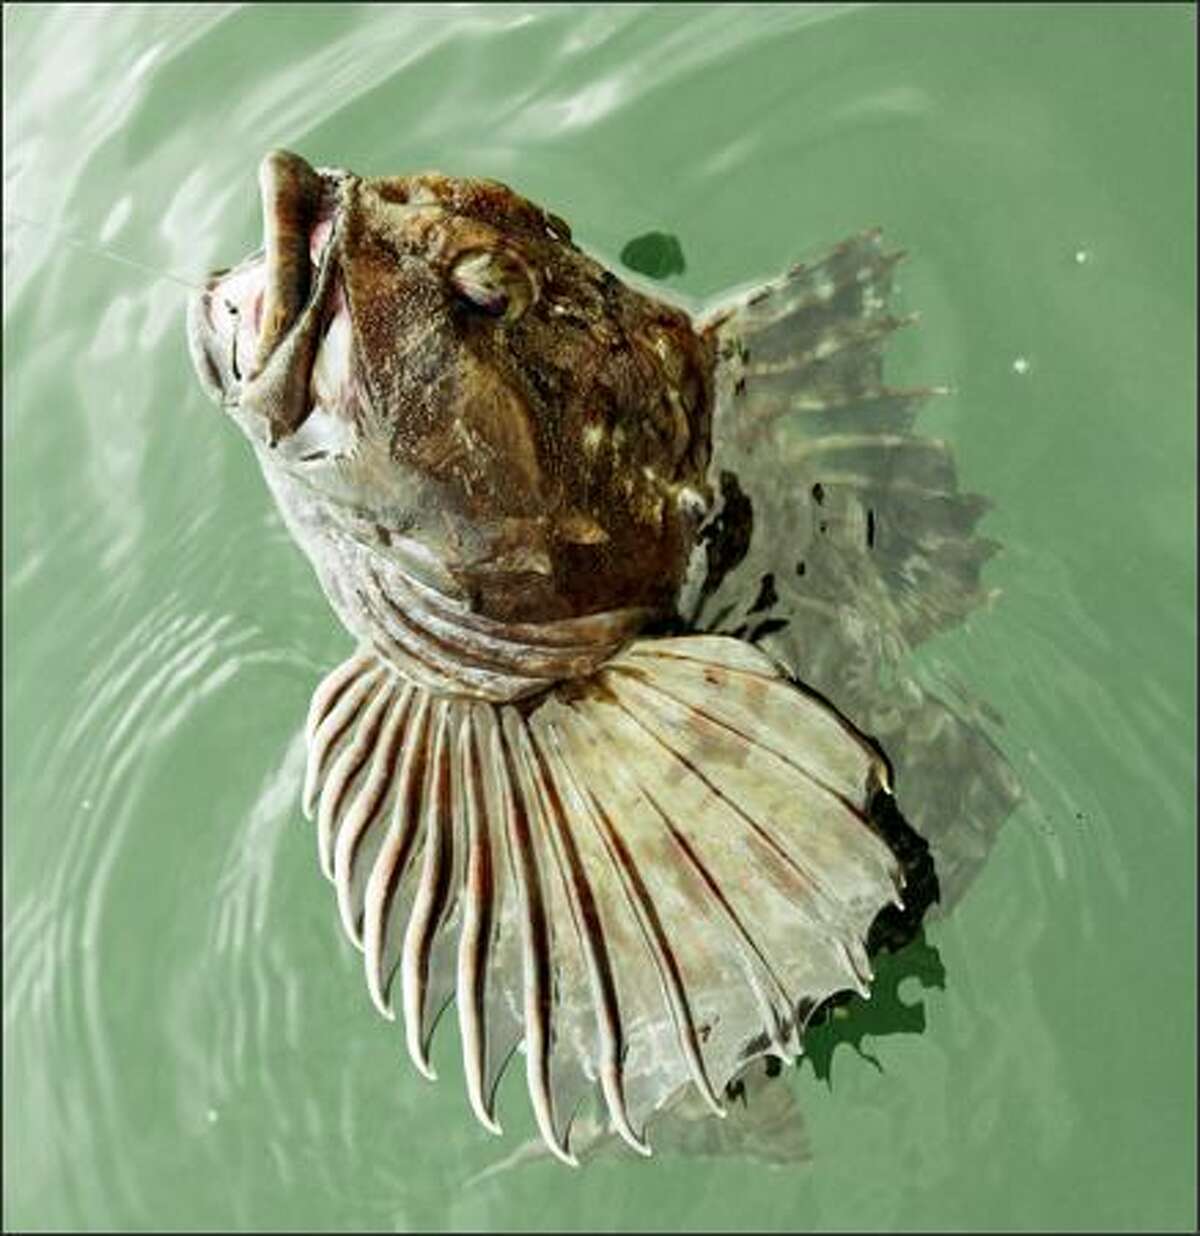 The lingcod's wide mouth and sharp teeth -- not to mention its strength -- make it a formidable predator. Though lingcod stocks have rebounded in inland waters, they're even more plentiful off the Washington Coast.